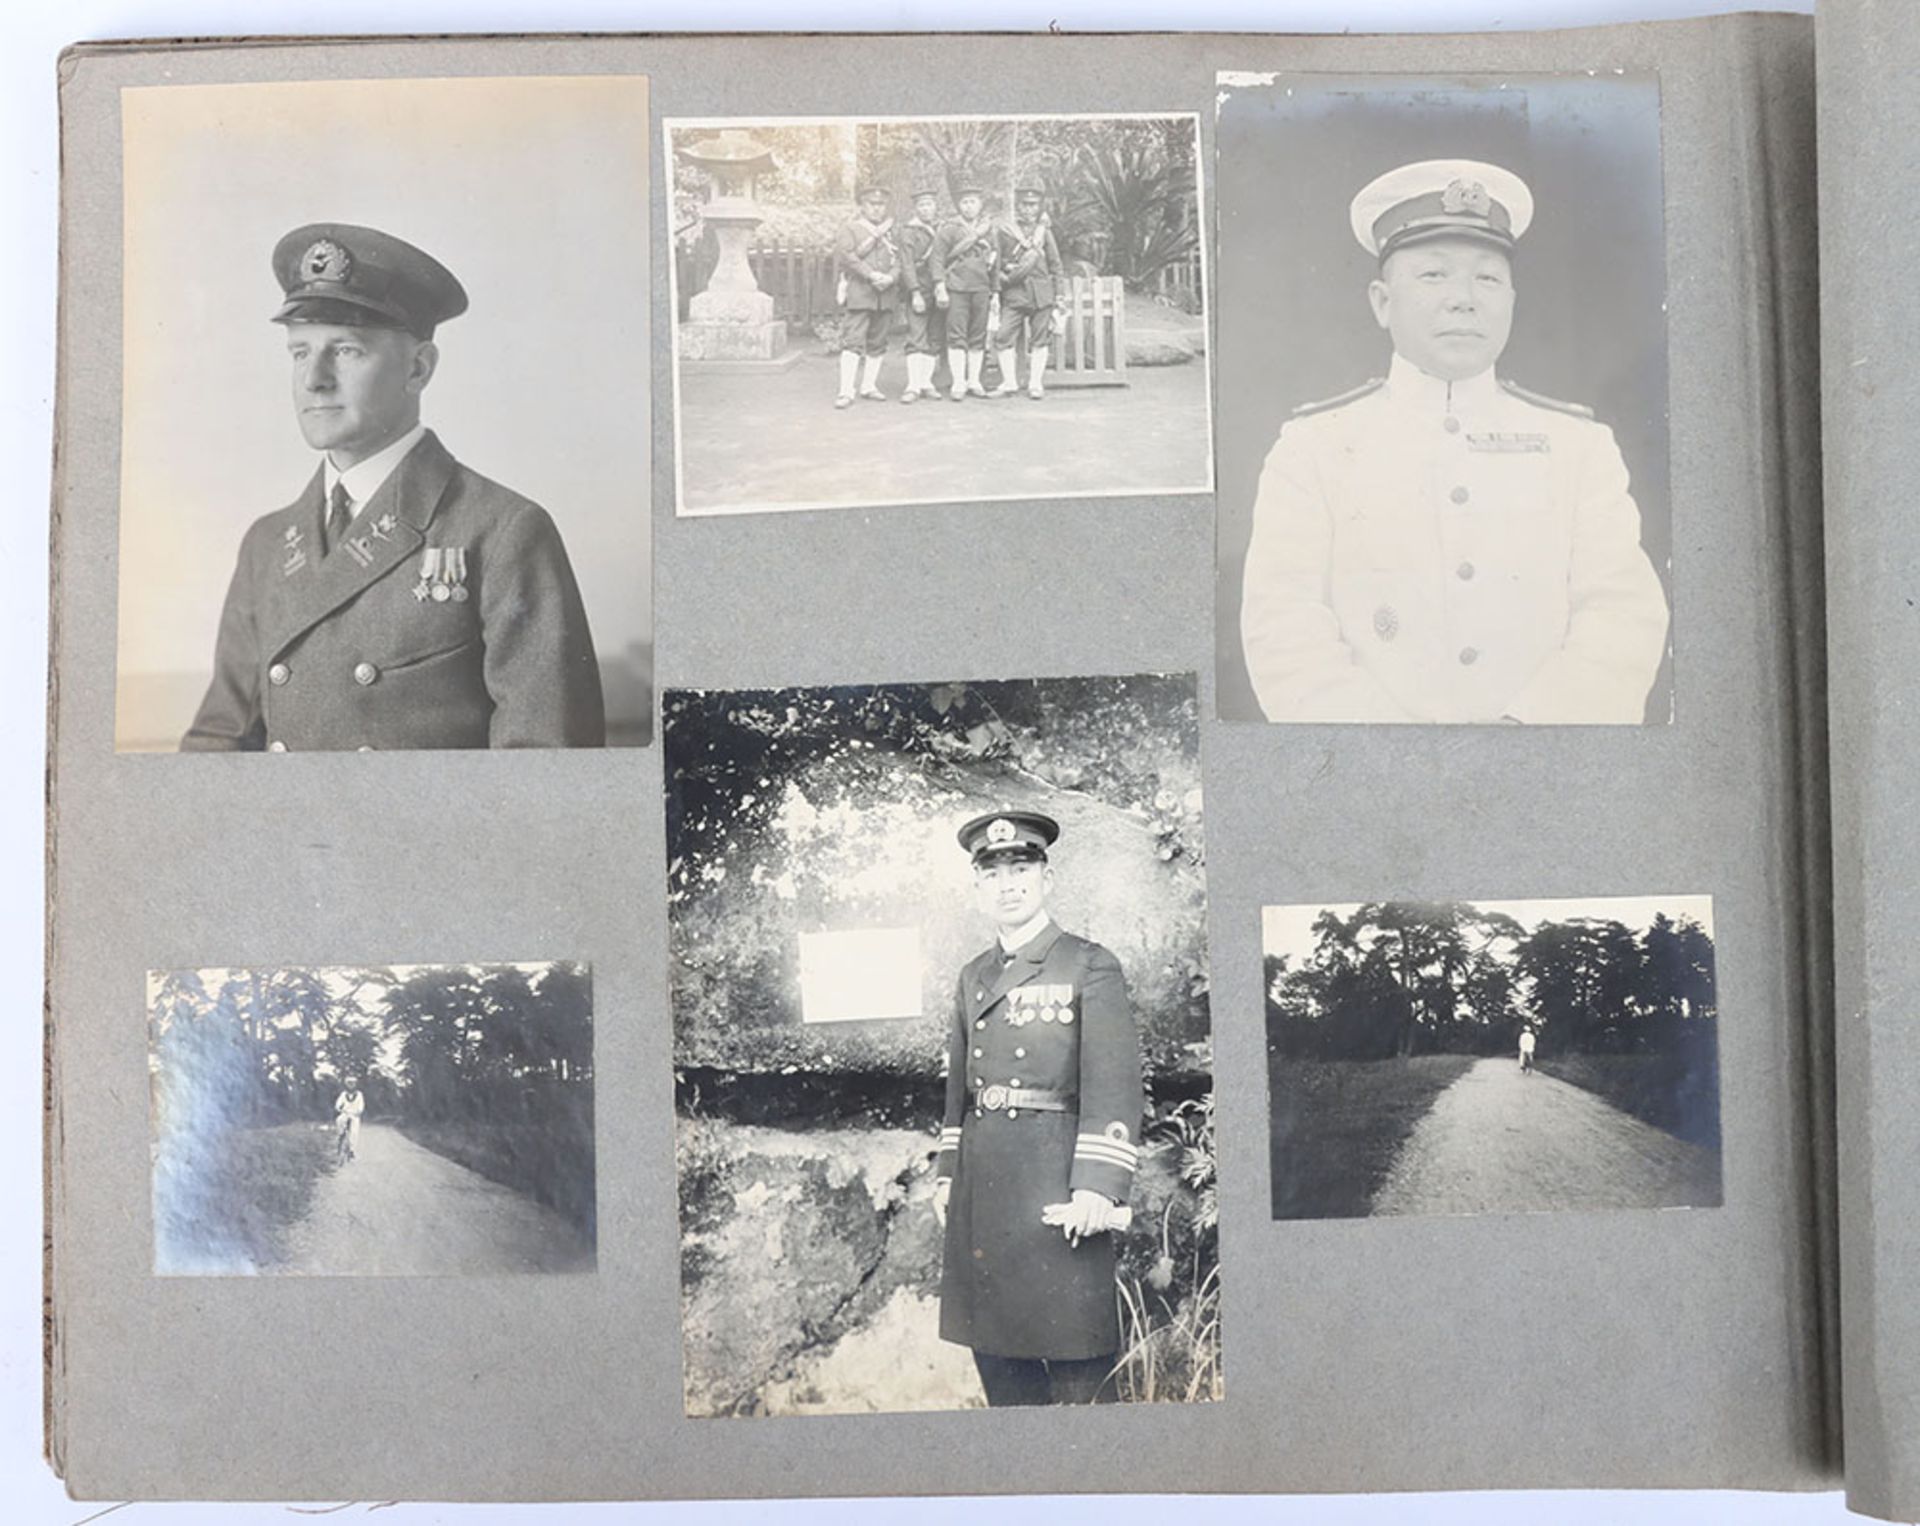 Historically Interesting Photograph Album Compiled by a Member of the Naval Aviation Station at Kasu - Image 23 of 47